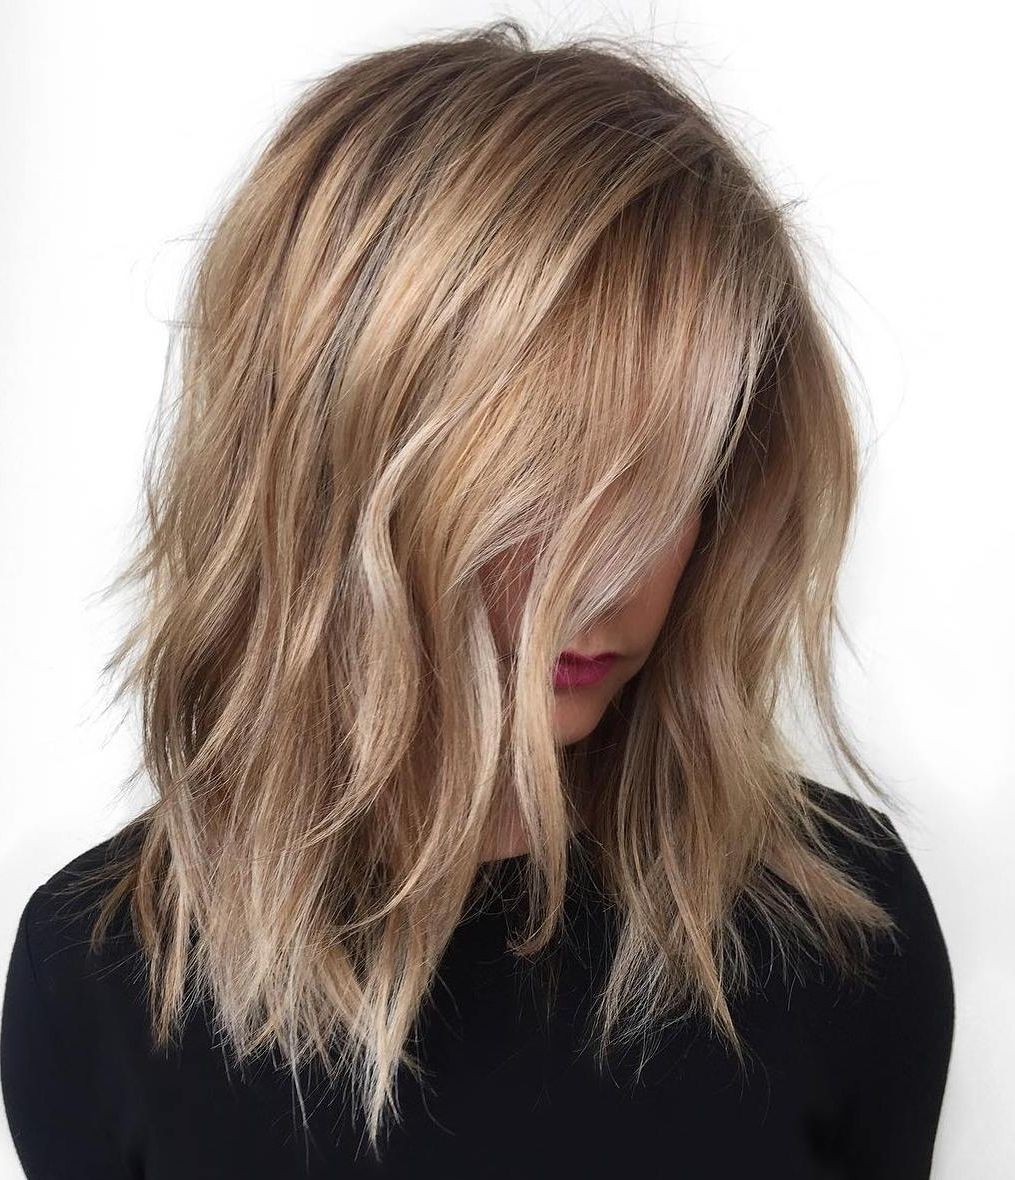 40 Styles With Medium Blonde Hair For Major Inspiration Within Most Current Choppy Cut Blonde Hairstyles With Bright Frame (View 10 of 20)